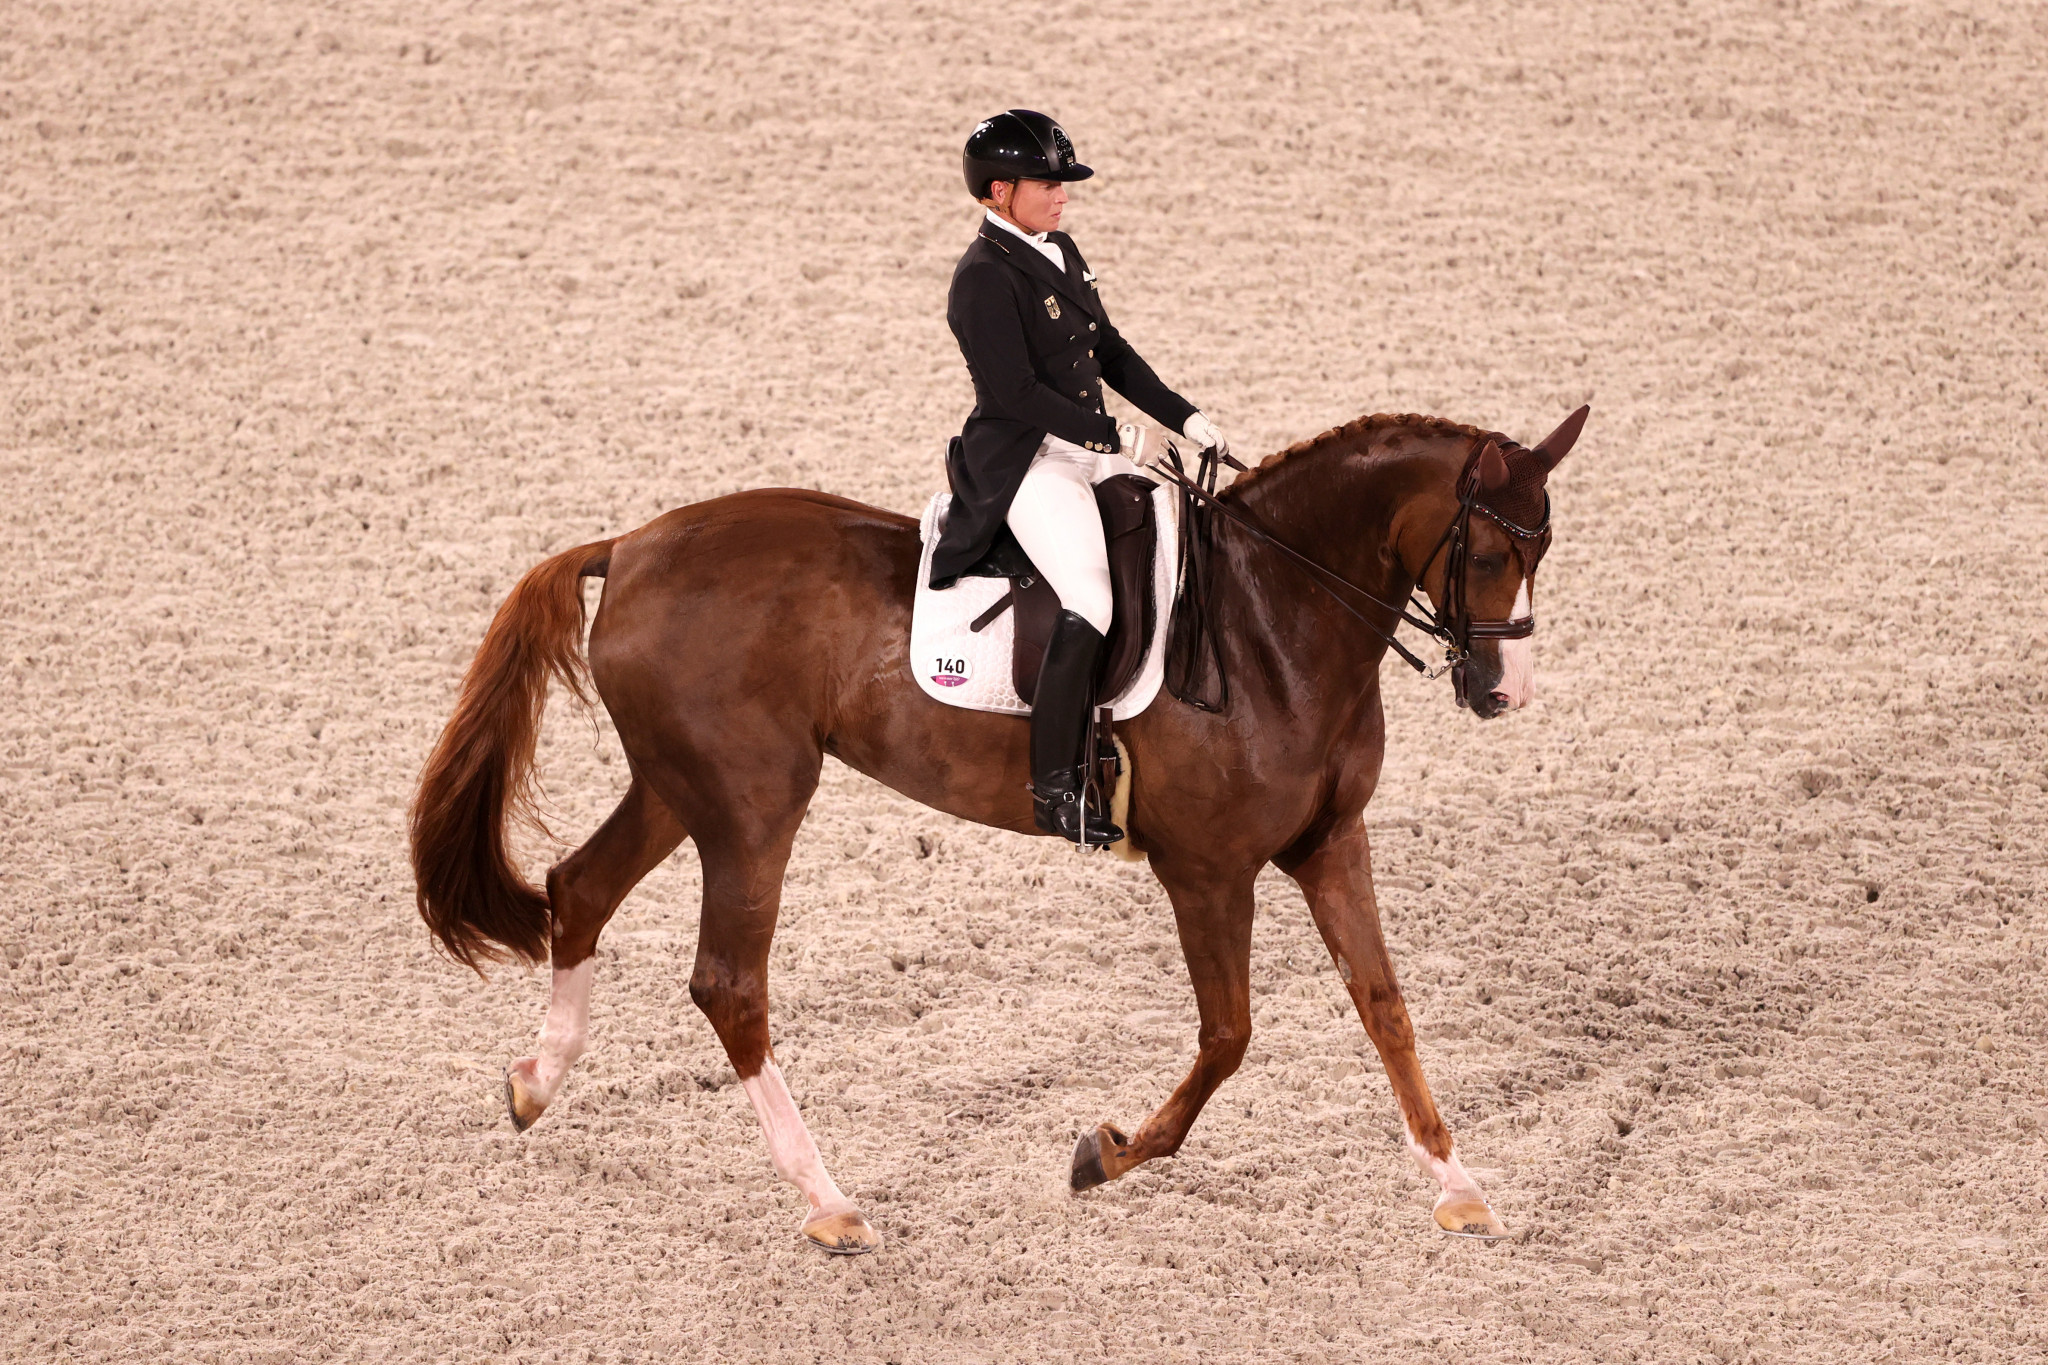 Isabell Werth, who has 21 gold, three silvers and one bronze, will be competing for Germany in the FEI European Dressage Championships ©Getty Images